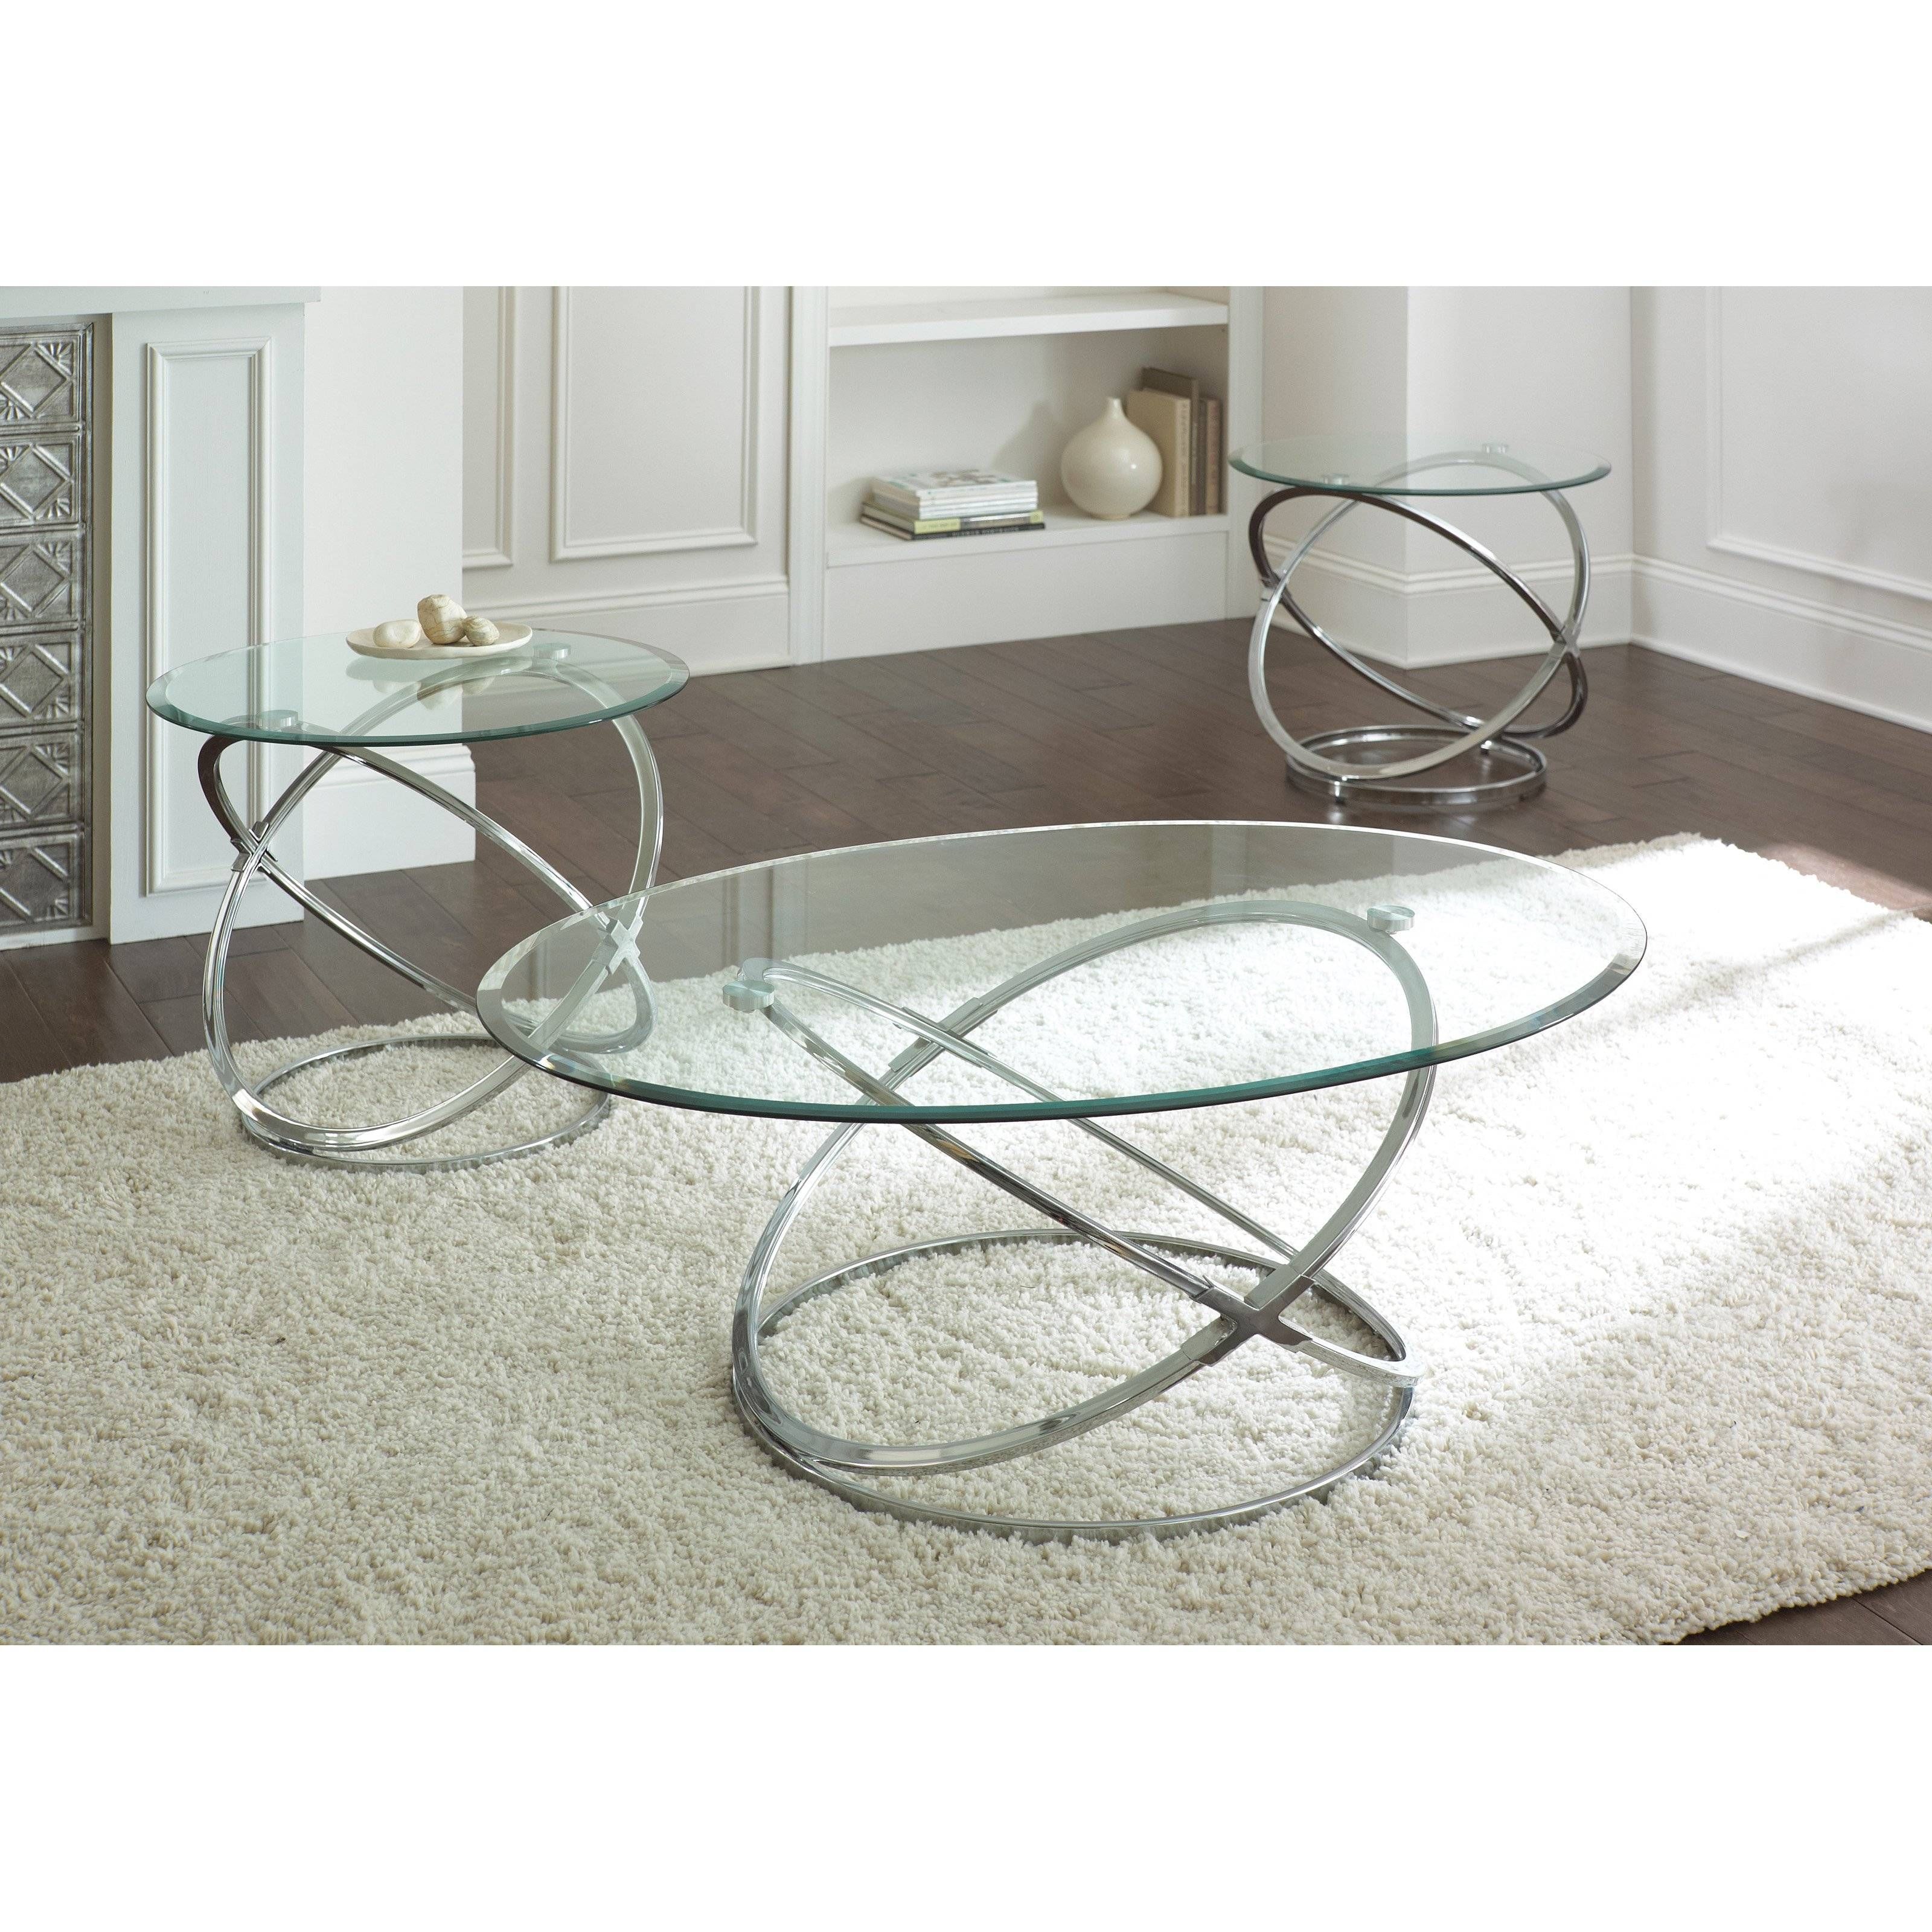 Steve Silver Orion Oval Chrome And Glass Coffee Table Set With Regard To Glass And Silver Coffee Tables (View 2 of 30)